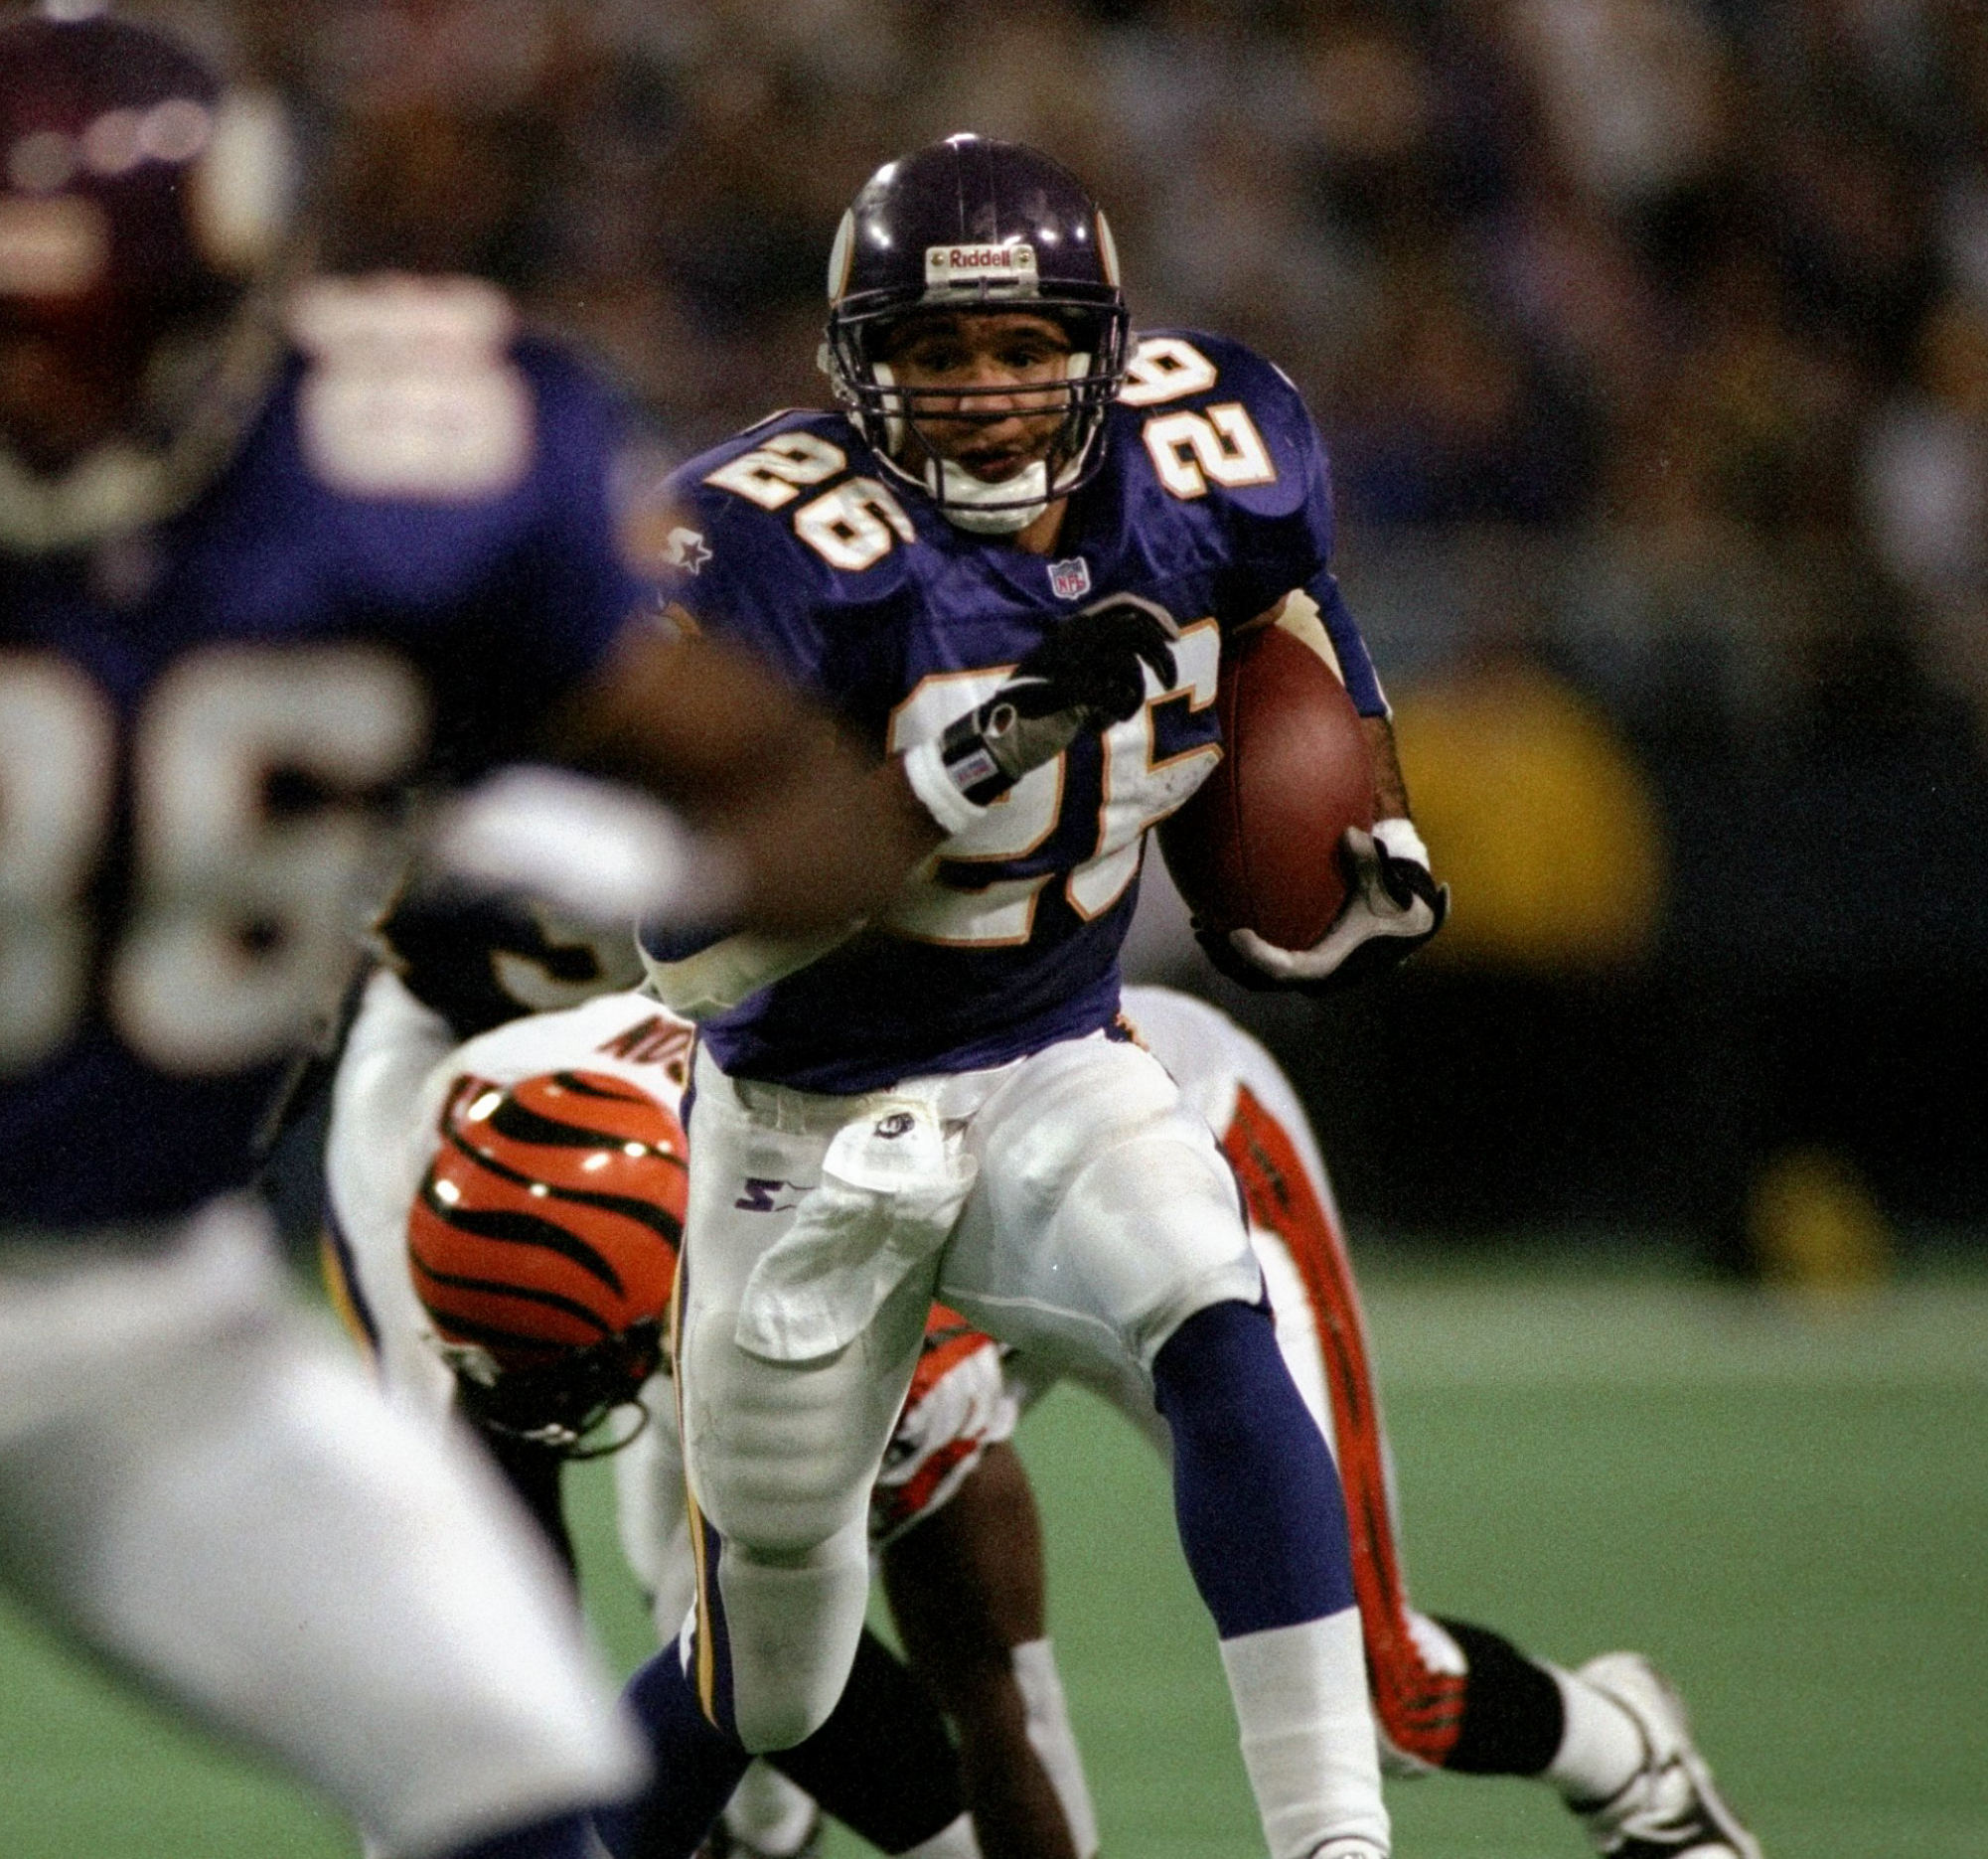 Yes, Robert Smith was never traded or flew the coop via free agency. He chose to retire early on his own accord. Doesn't mean fans can't still wish he'd worn purple longer. After leading the NFC in rushing yards in 2000 with 1,521 – his best year – he called it a career at the end of the season. (credit: Matthew Stockman /Allsport)